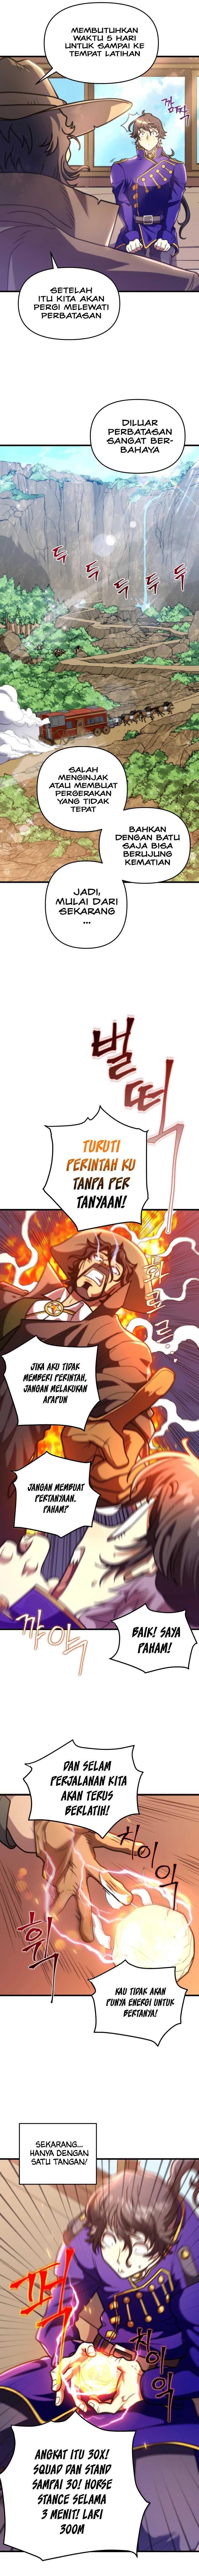 1RM’s Gigant Rider Chapter 02